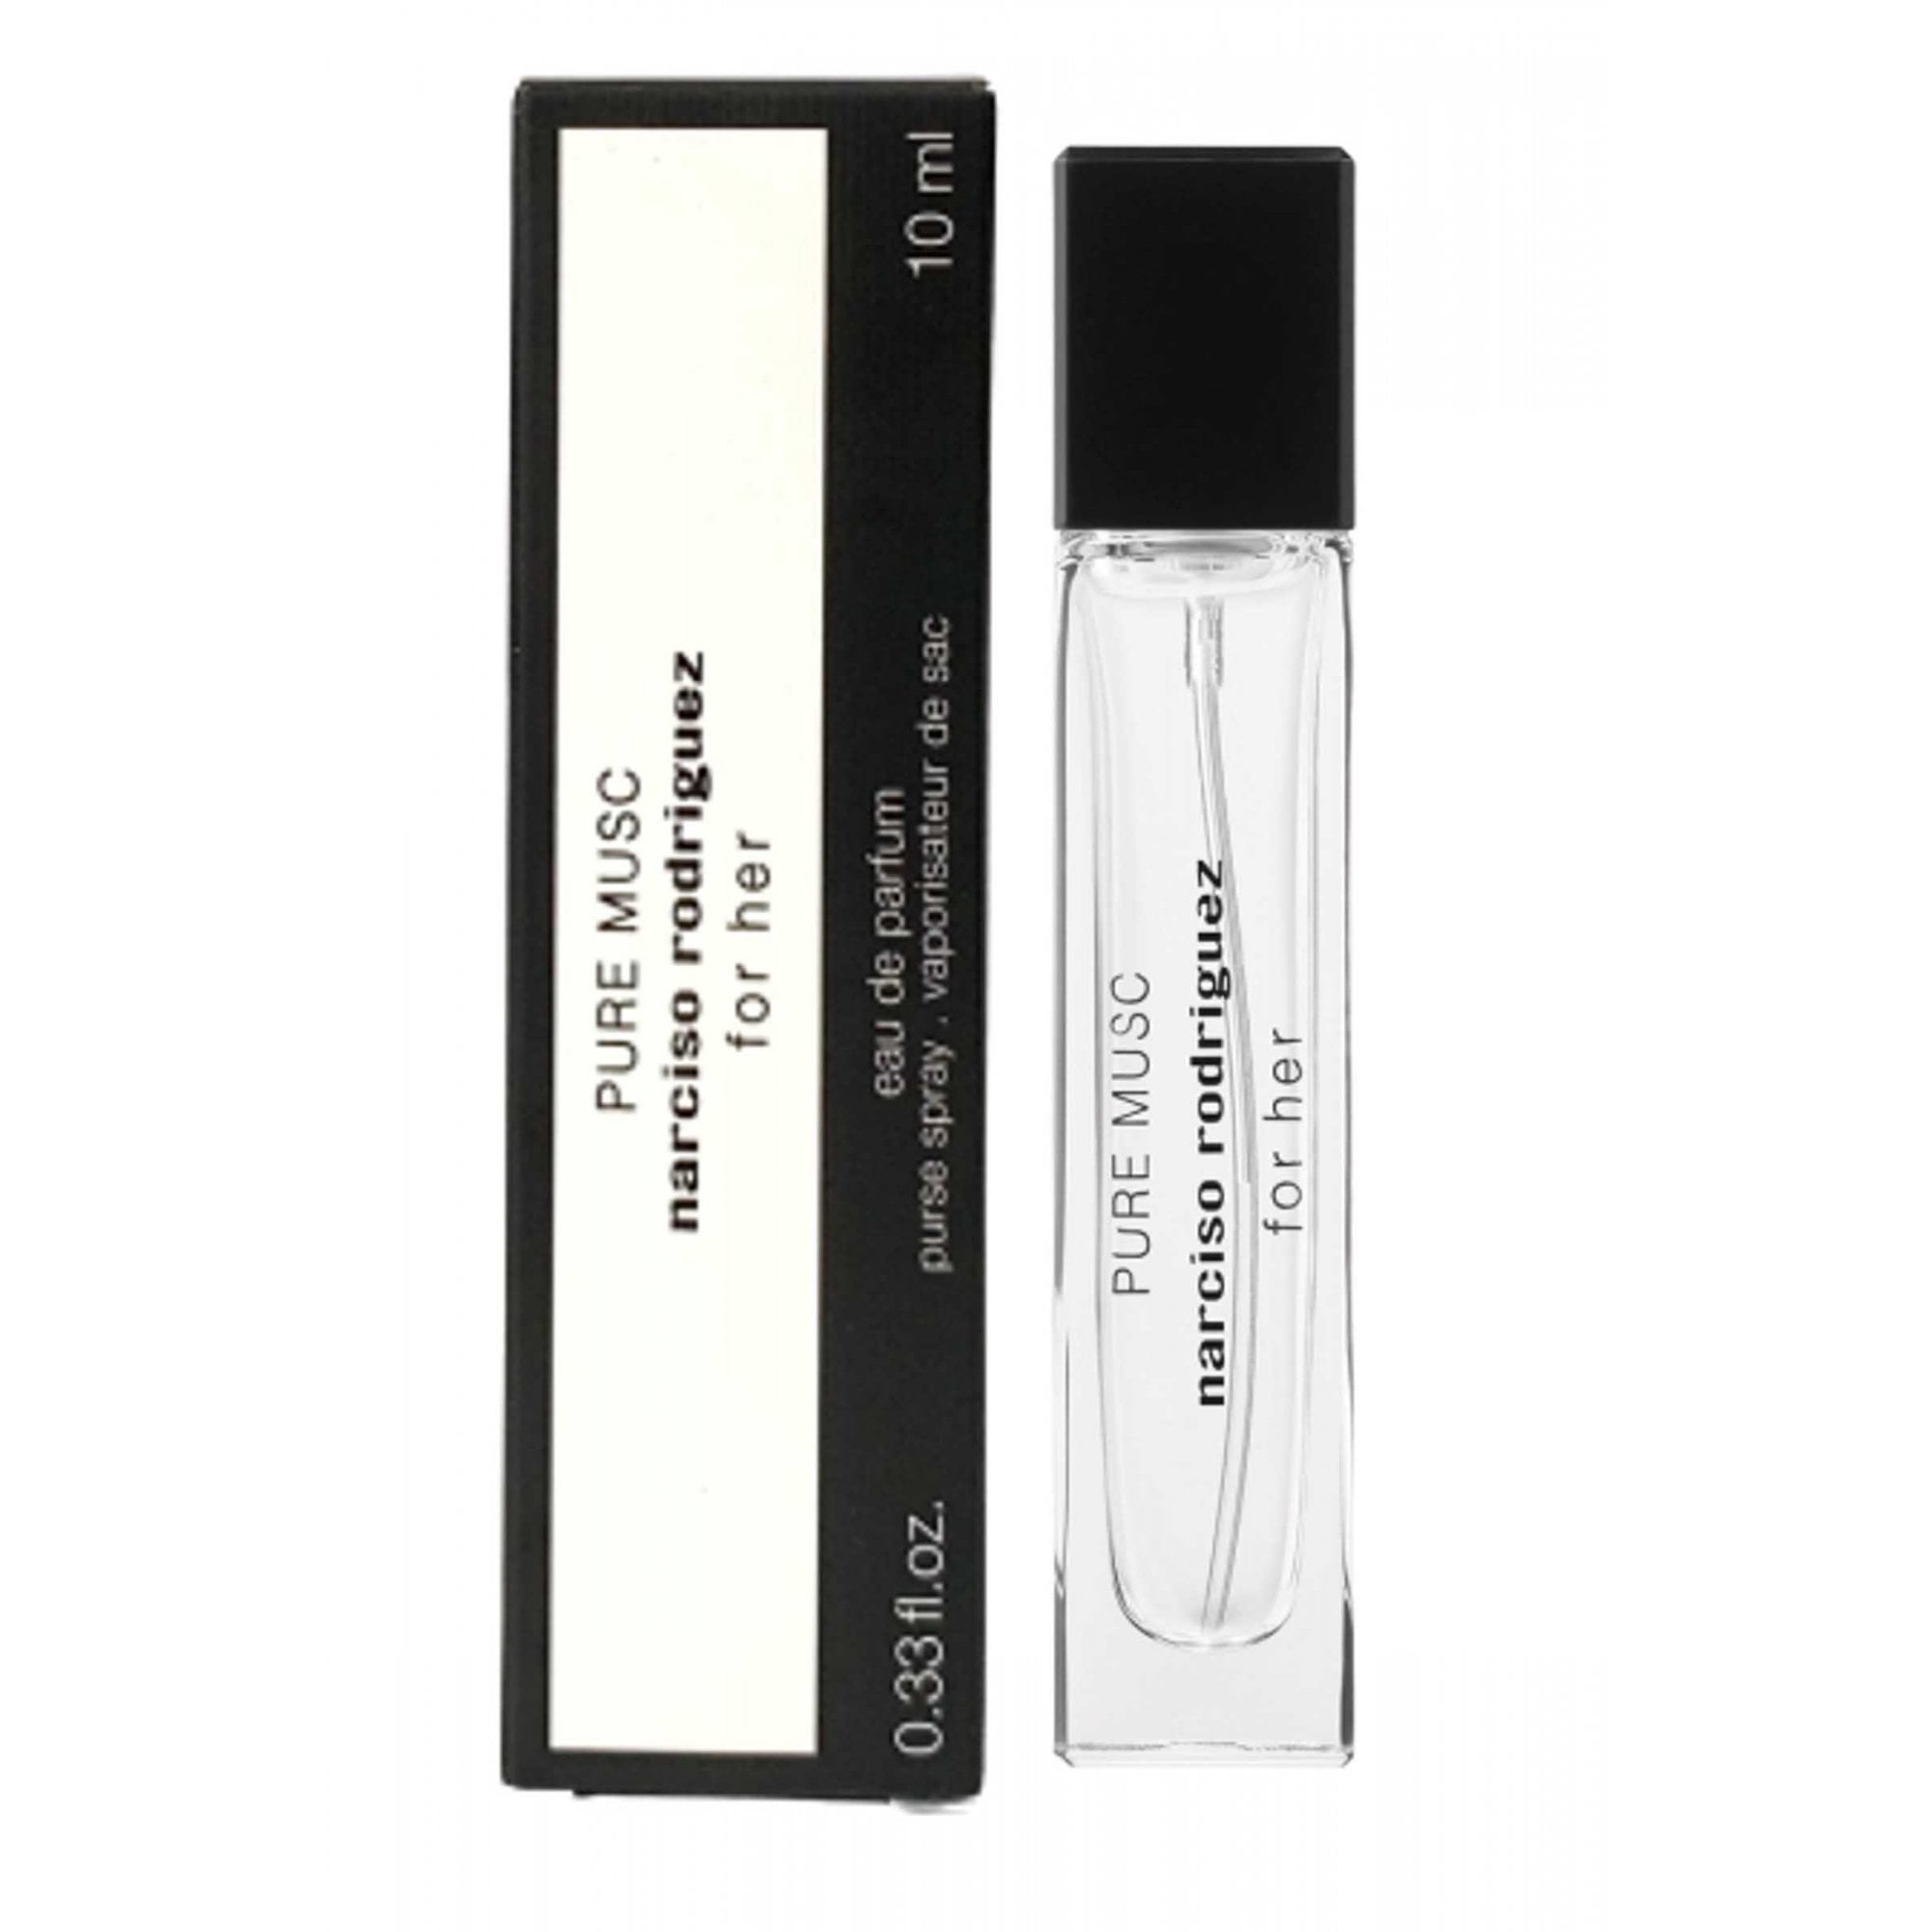 Narciso Rodriguez Pure Musc for Her EDP / Travel Size (10ml)